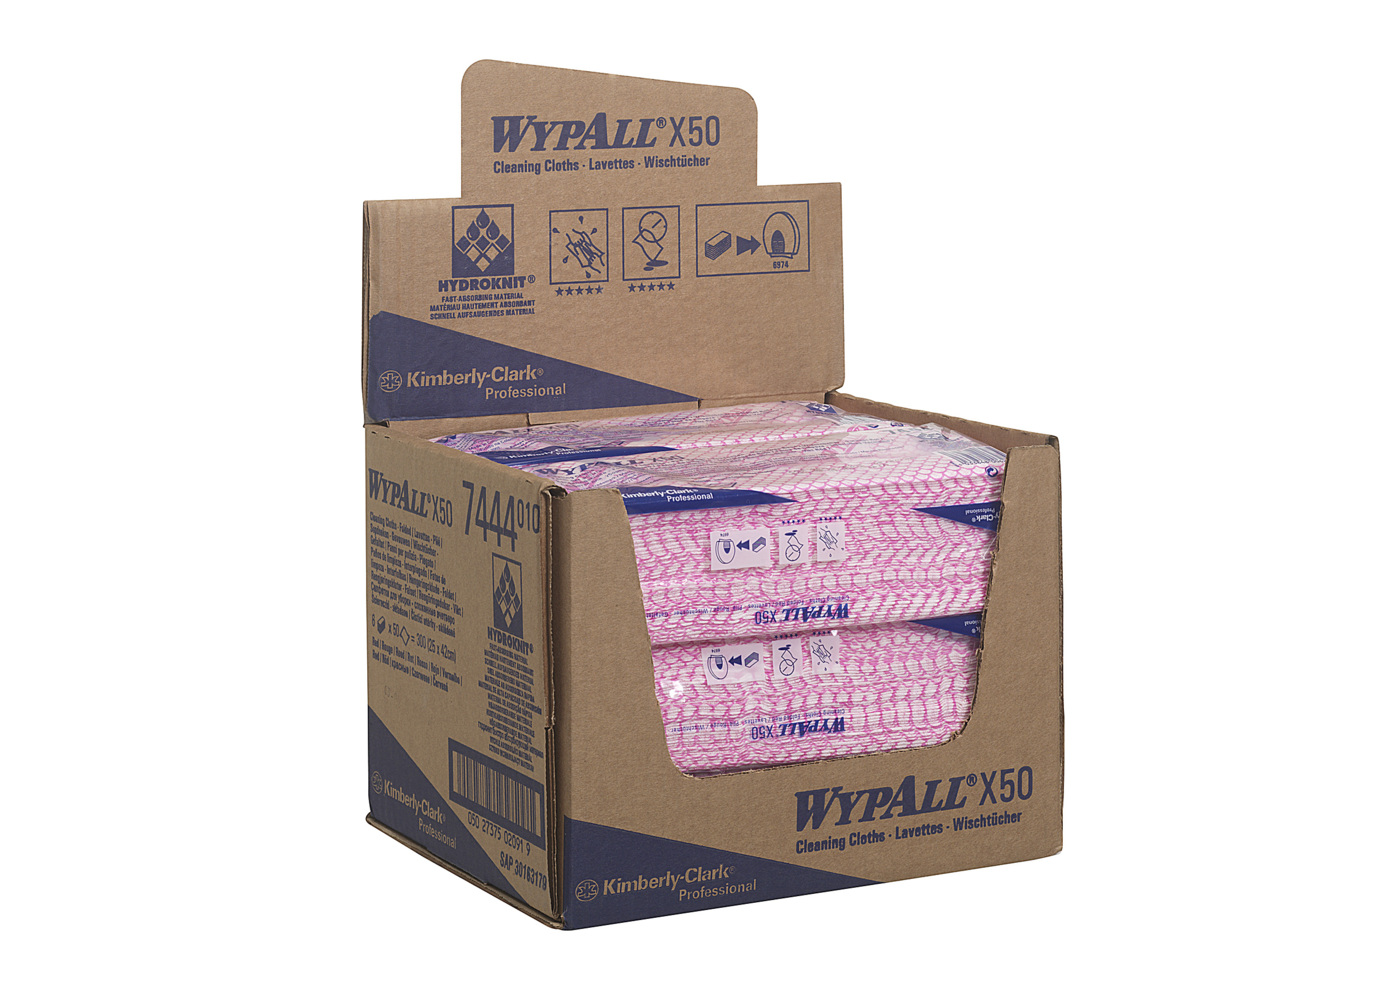 WypAll® X50 Colour Coded Cleaning Cloths 7444 - Red Wiping Cloths - 6 Packs x 50 Interfolded Colour Coded Cloths (300 total) - 7444